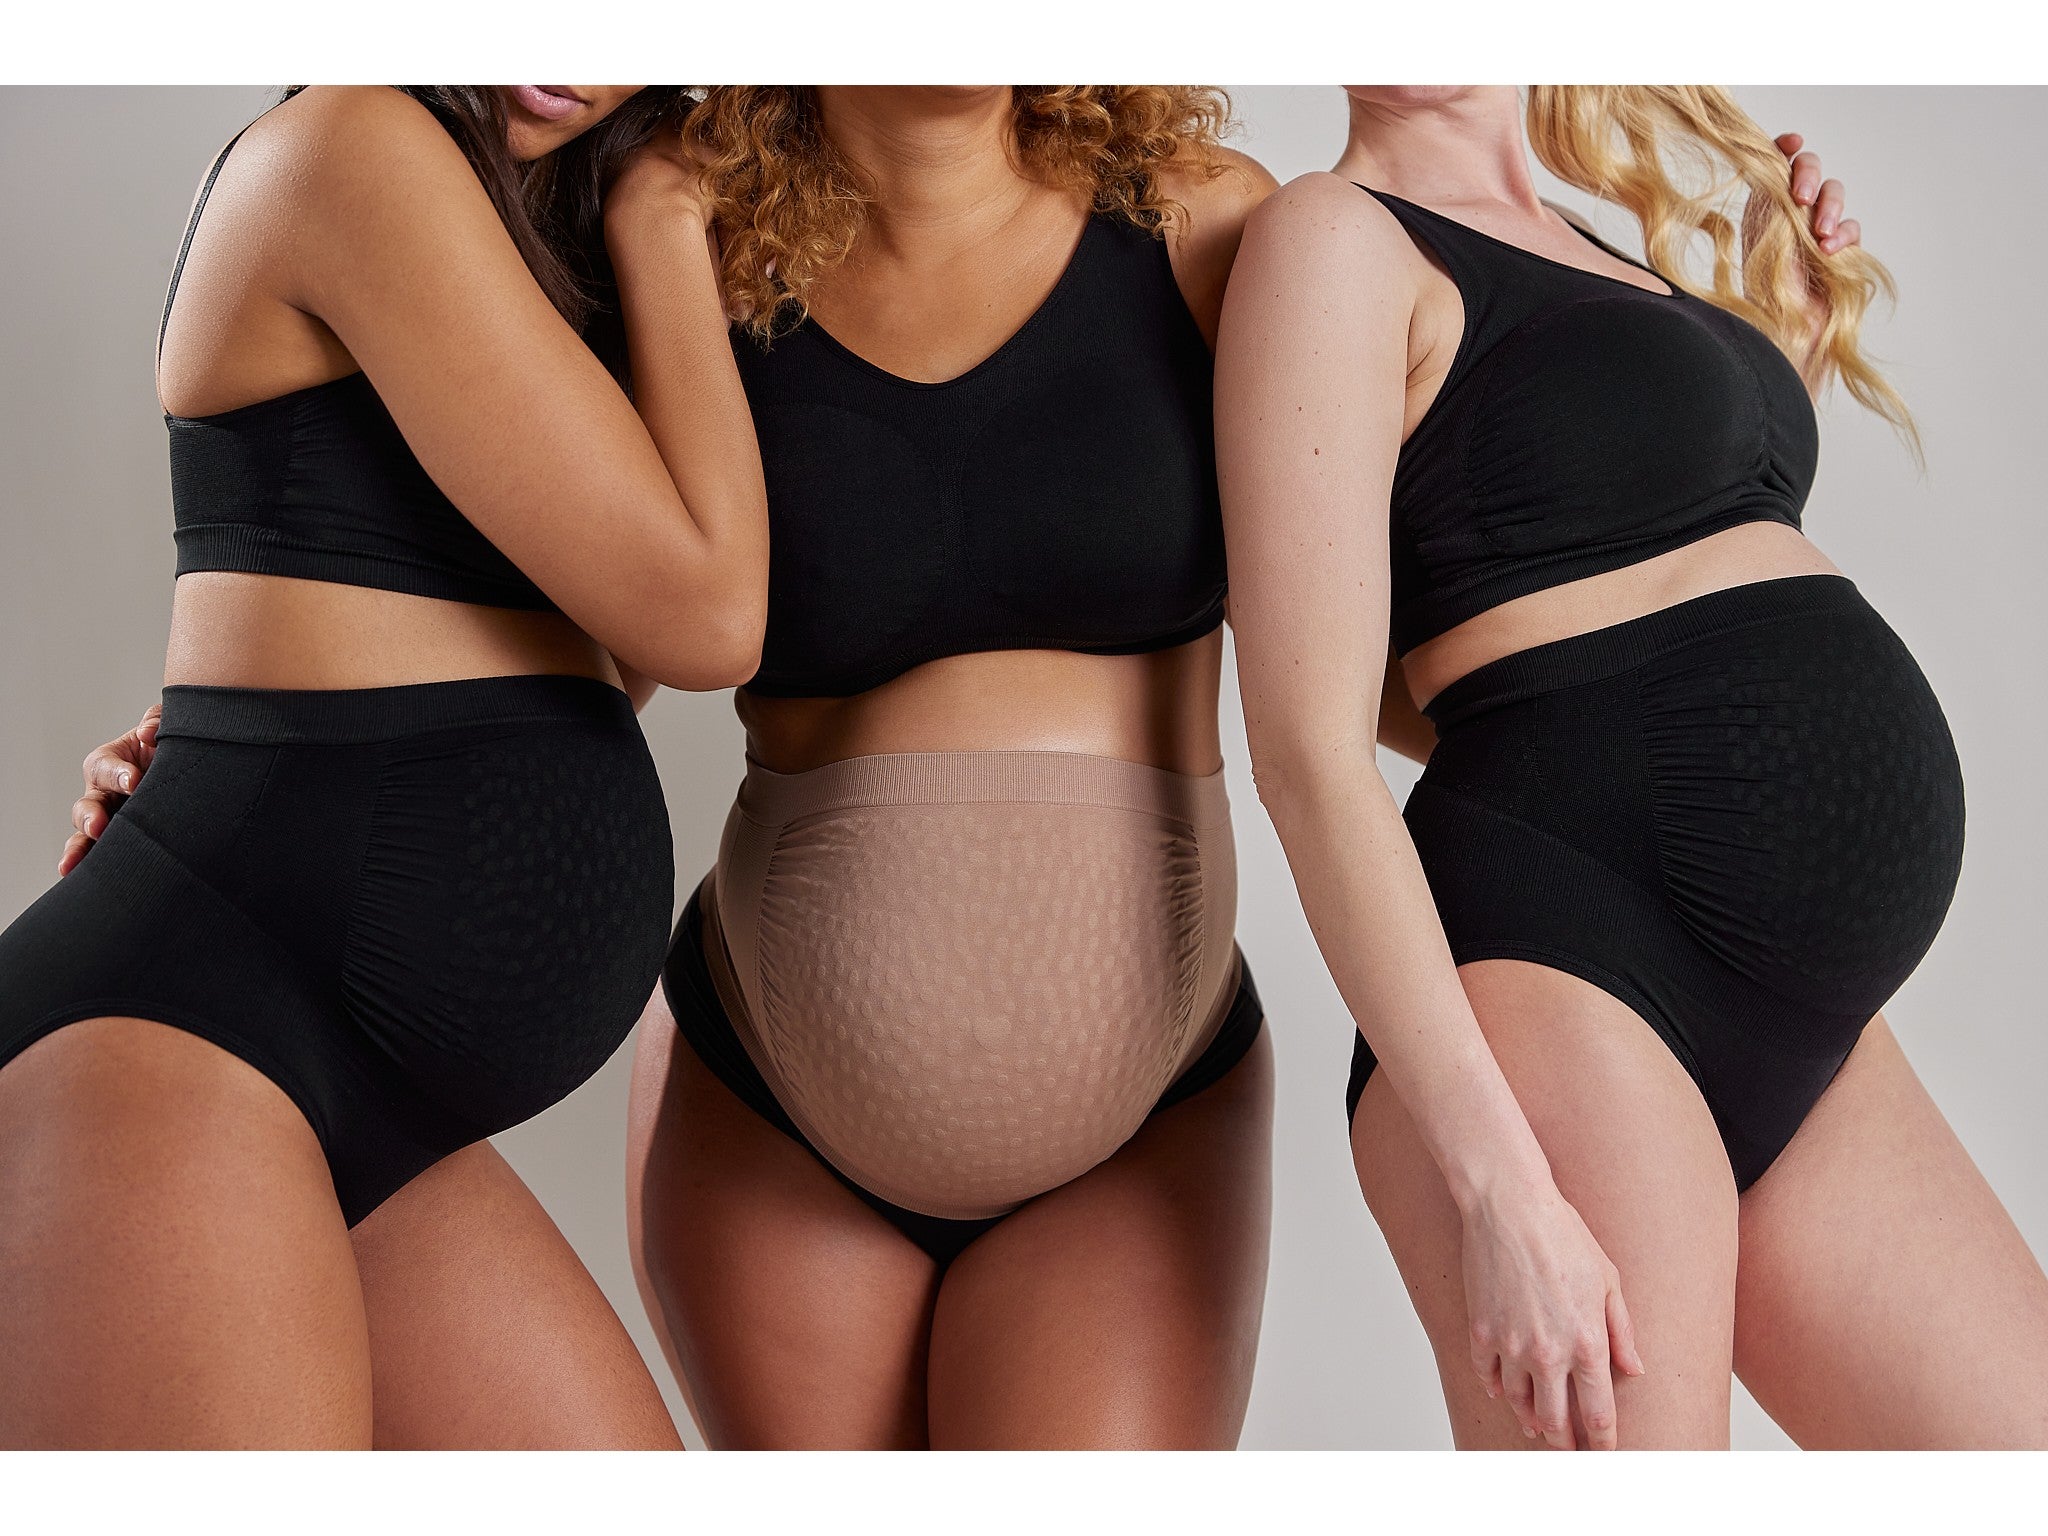 Secret Saviours’ prevention wear is available as bump bands, briefs, leggings, shorts or bras